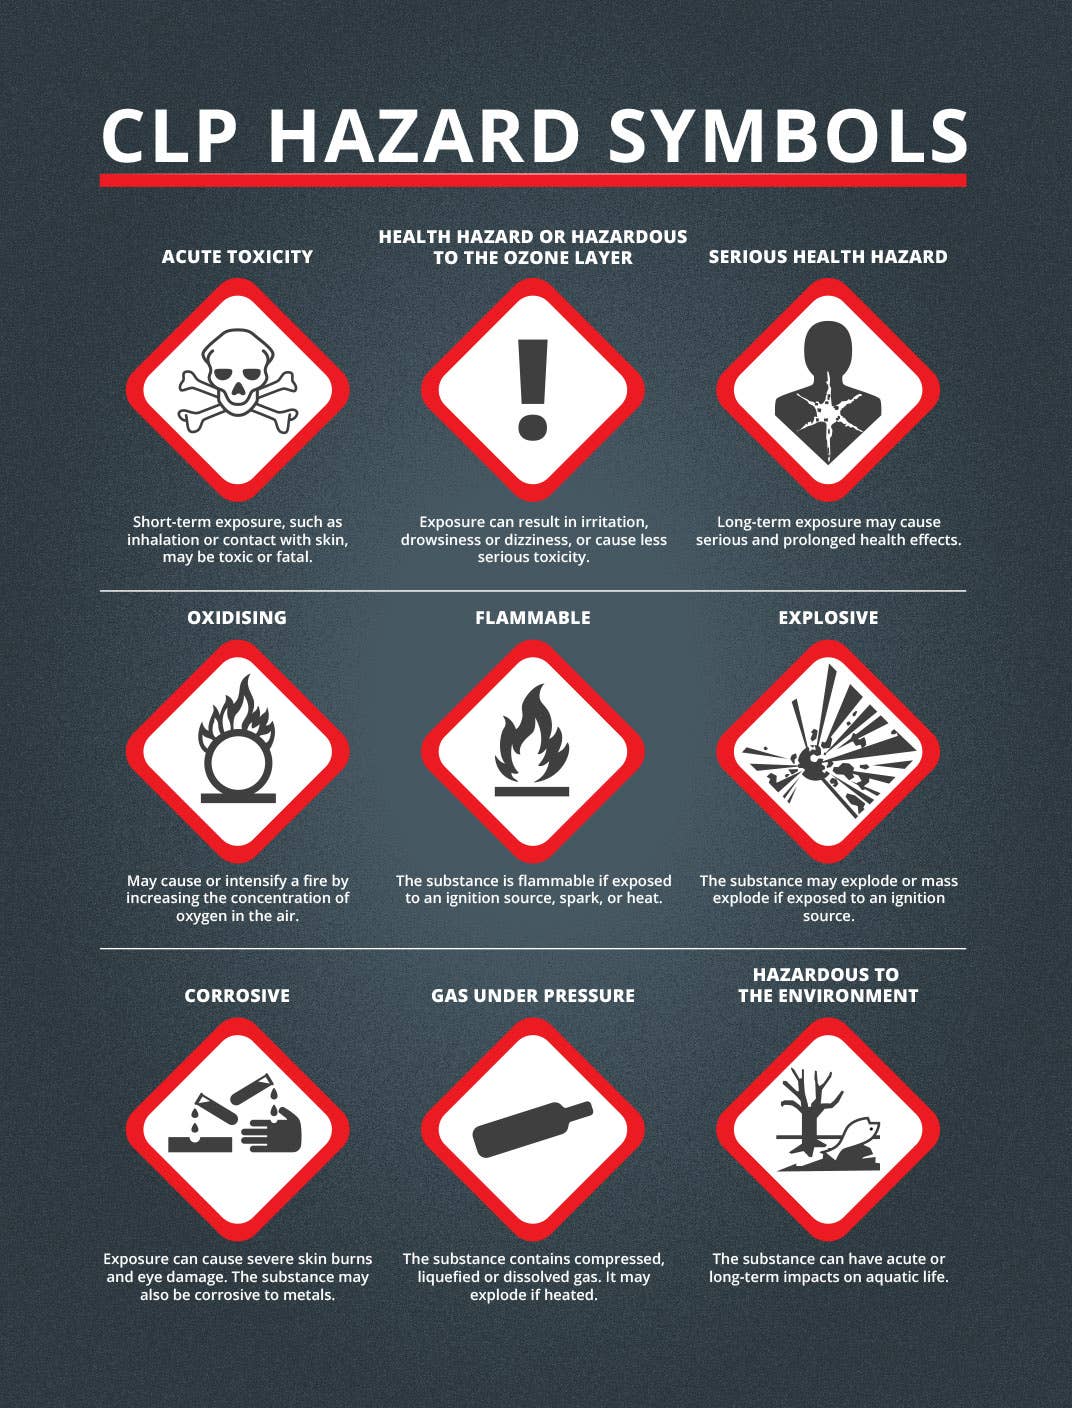 Coshh Hazard Symbols And Their Meanings Explained